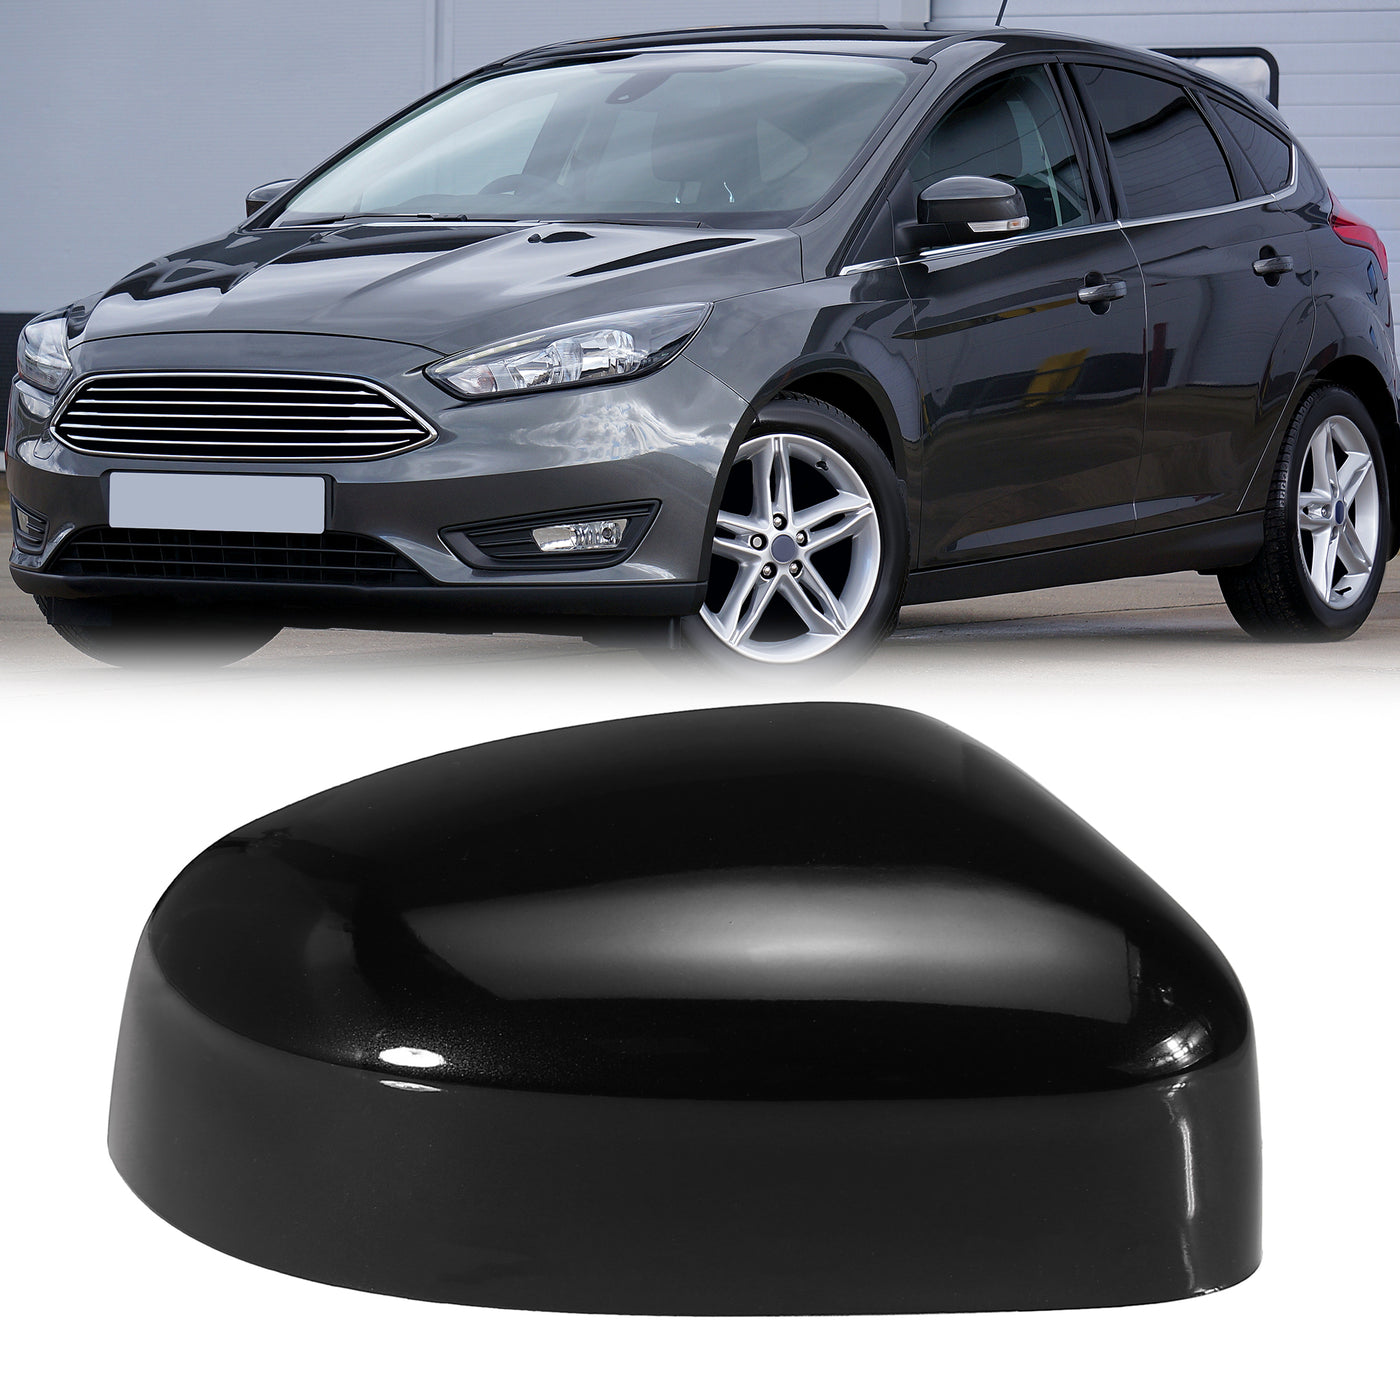 X AUTOHAUX Black Right Side Car Side Door Wing Mirror Cover Rear View Mirror Cap for Ford Focus MK2 Facelift 2008-2011 for Ford Focus MK3 2012-2017